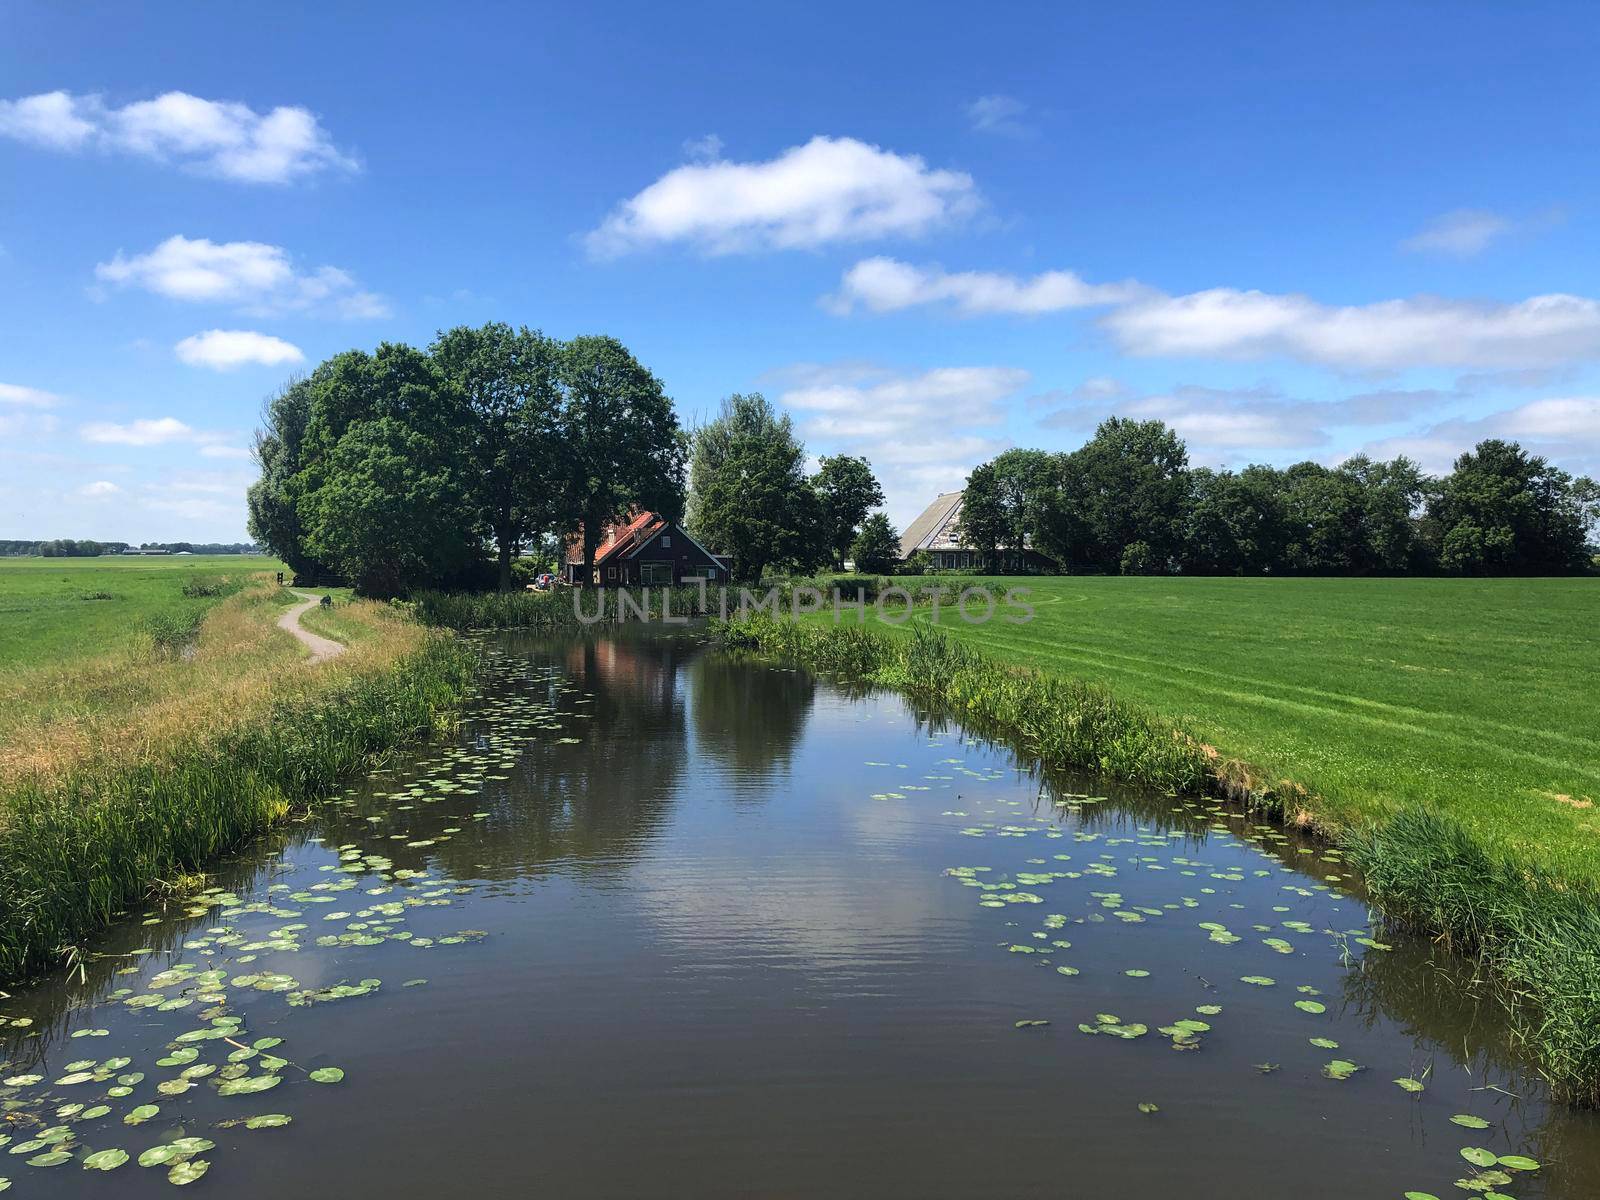 Canal with seeblatt in Friesland, The Netherlands